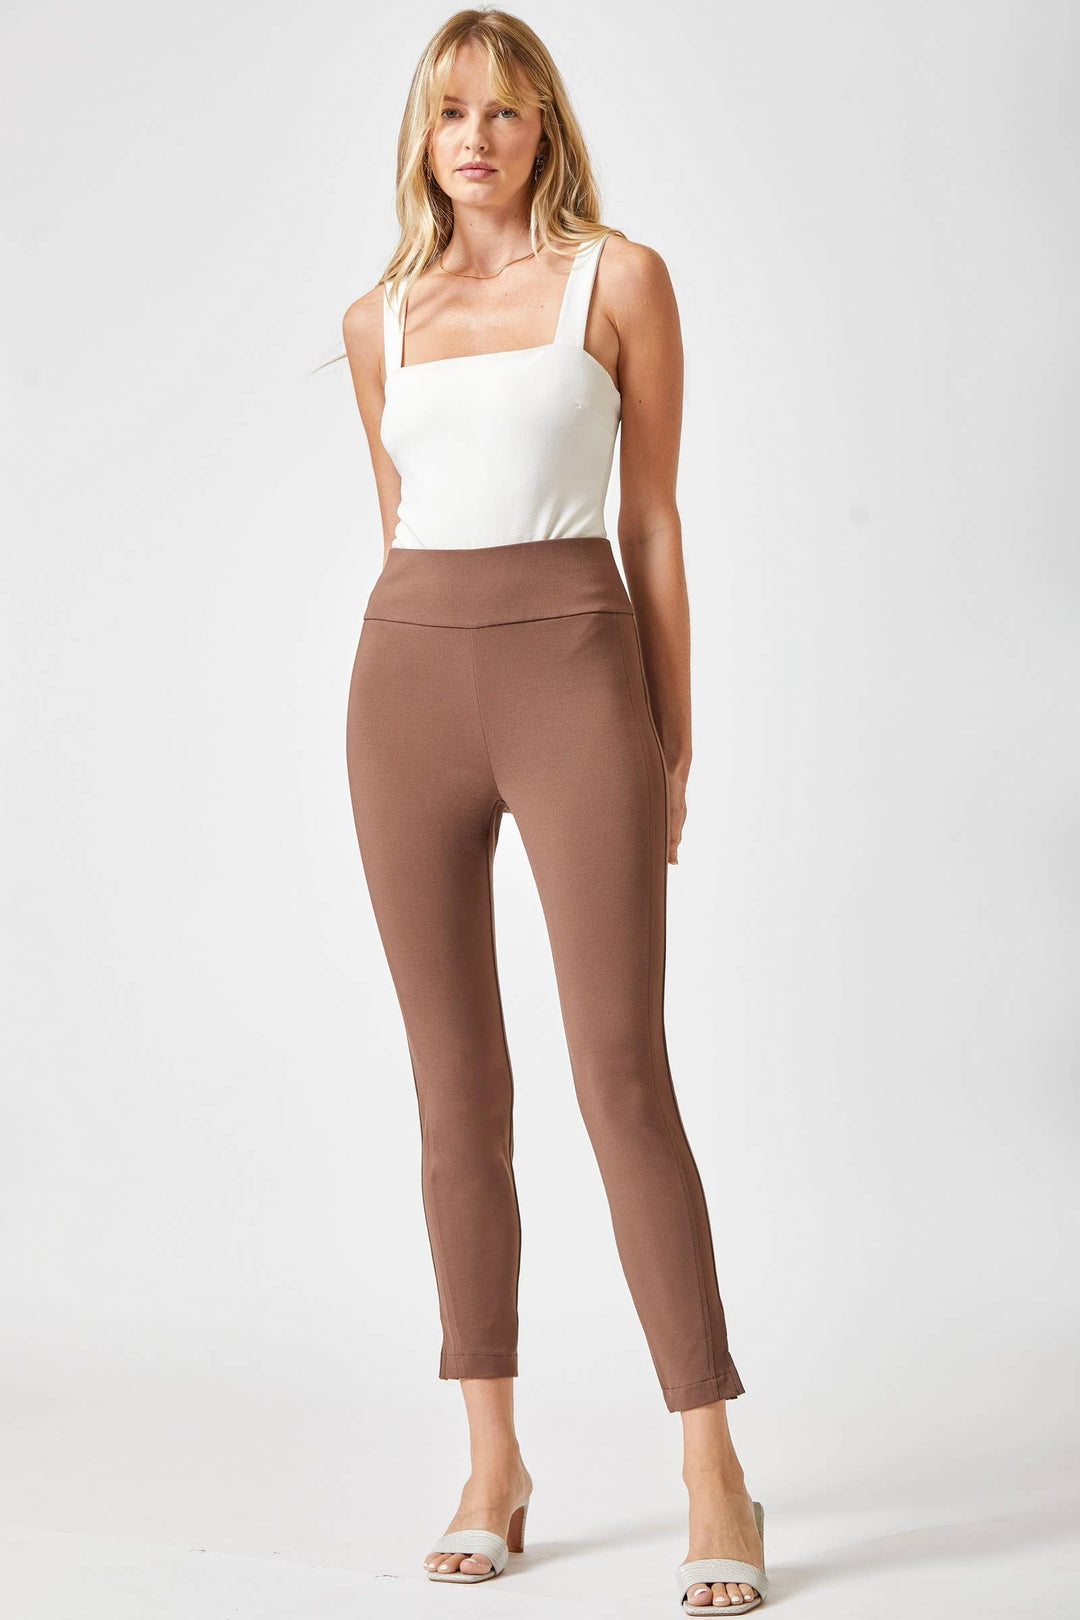 Lindzy Magic High Waisted Skinny Pants, Dark Brown-Pants-Inspired by Justeen-Women's Clothing Boutique in Chicago, Illinois